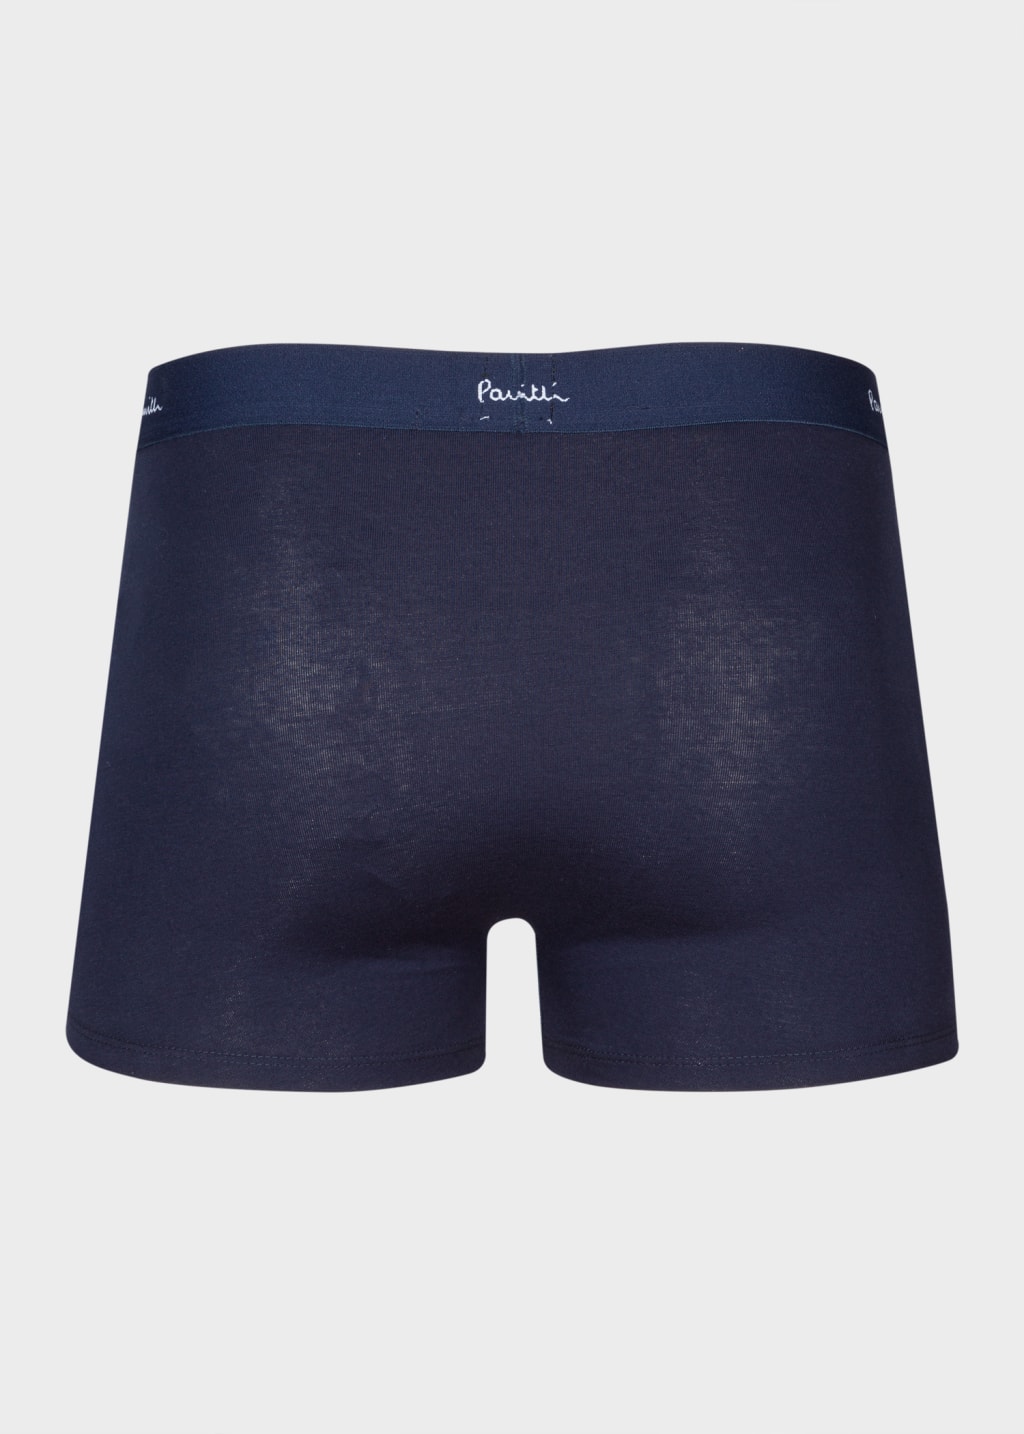 Product view - Navy Organic Cotton Low-Rise Boxer Briefs Three Pack Paul Smith